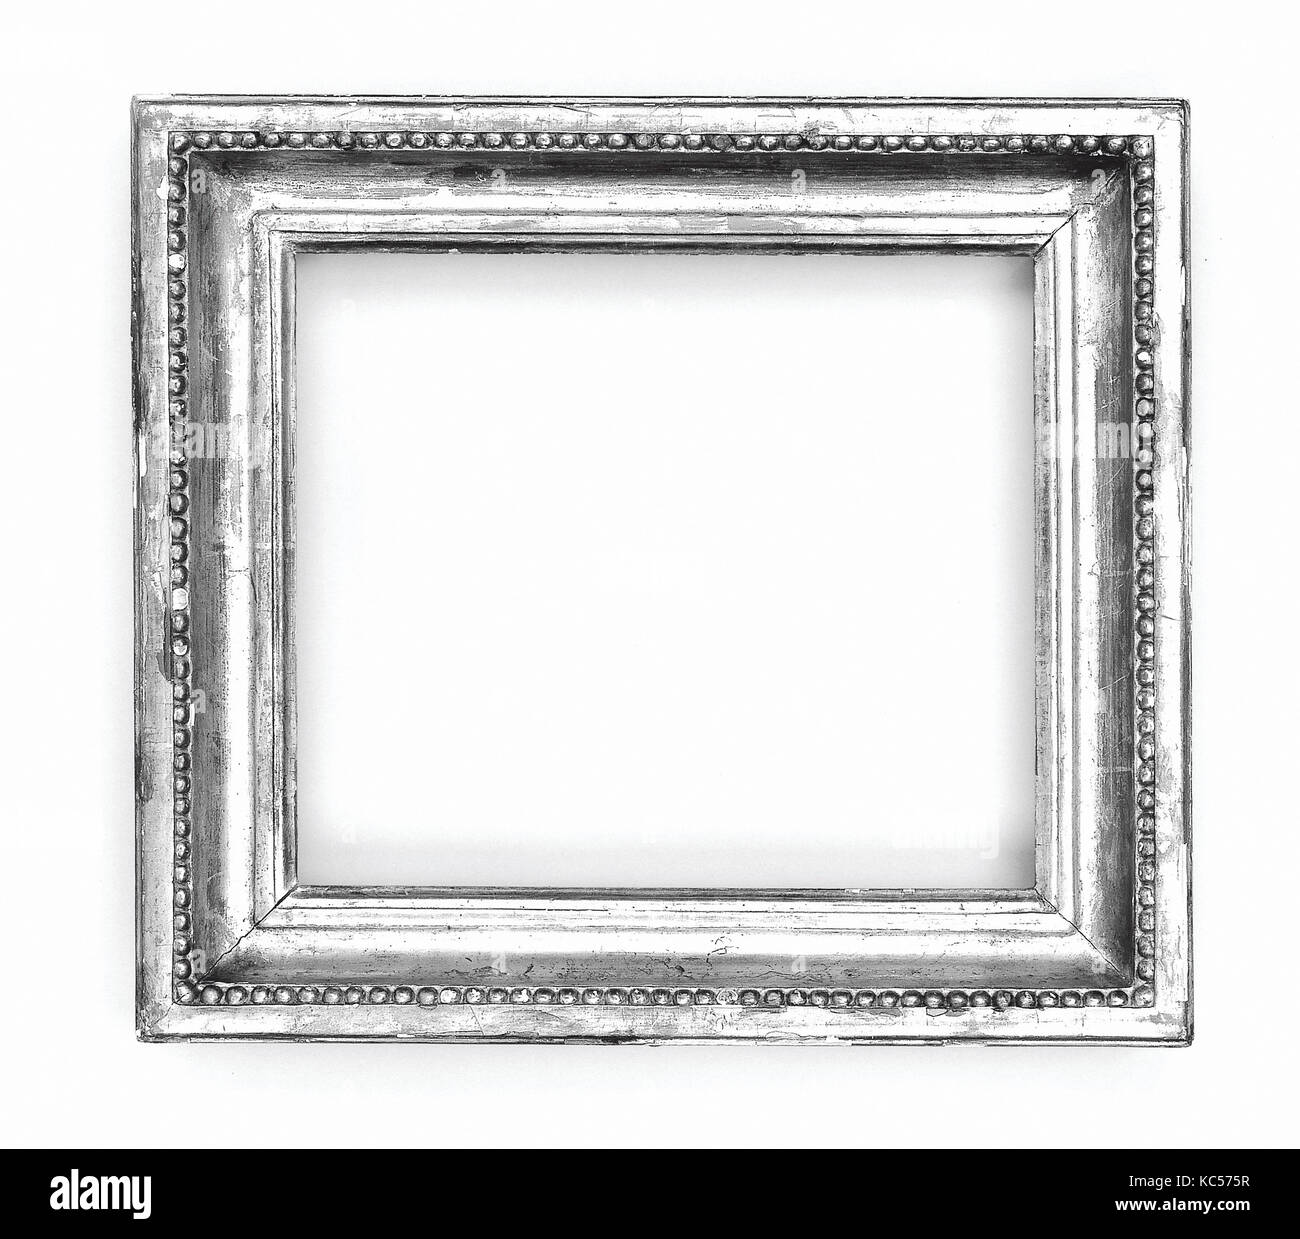 Hollow molding, early 19th century, American, United States, Basswood, 33.9 x 37.5, 23 x 26.6, 24.7 x 28.5 cm., Frames Stock Photo